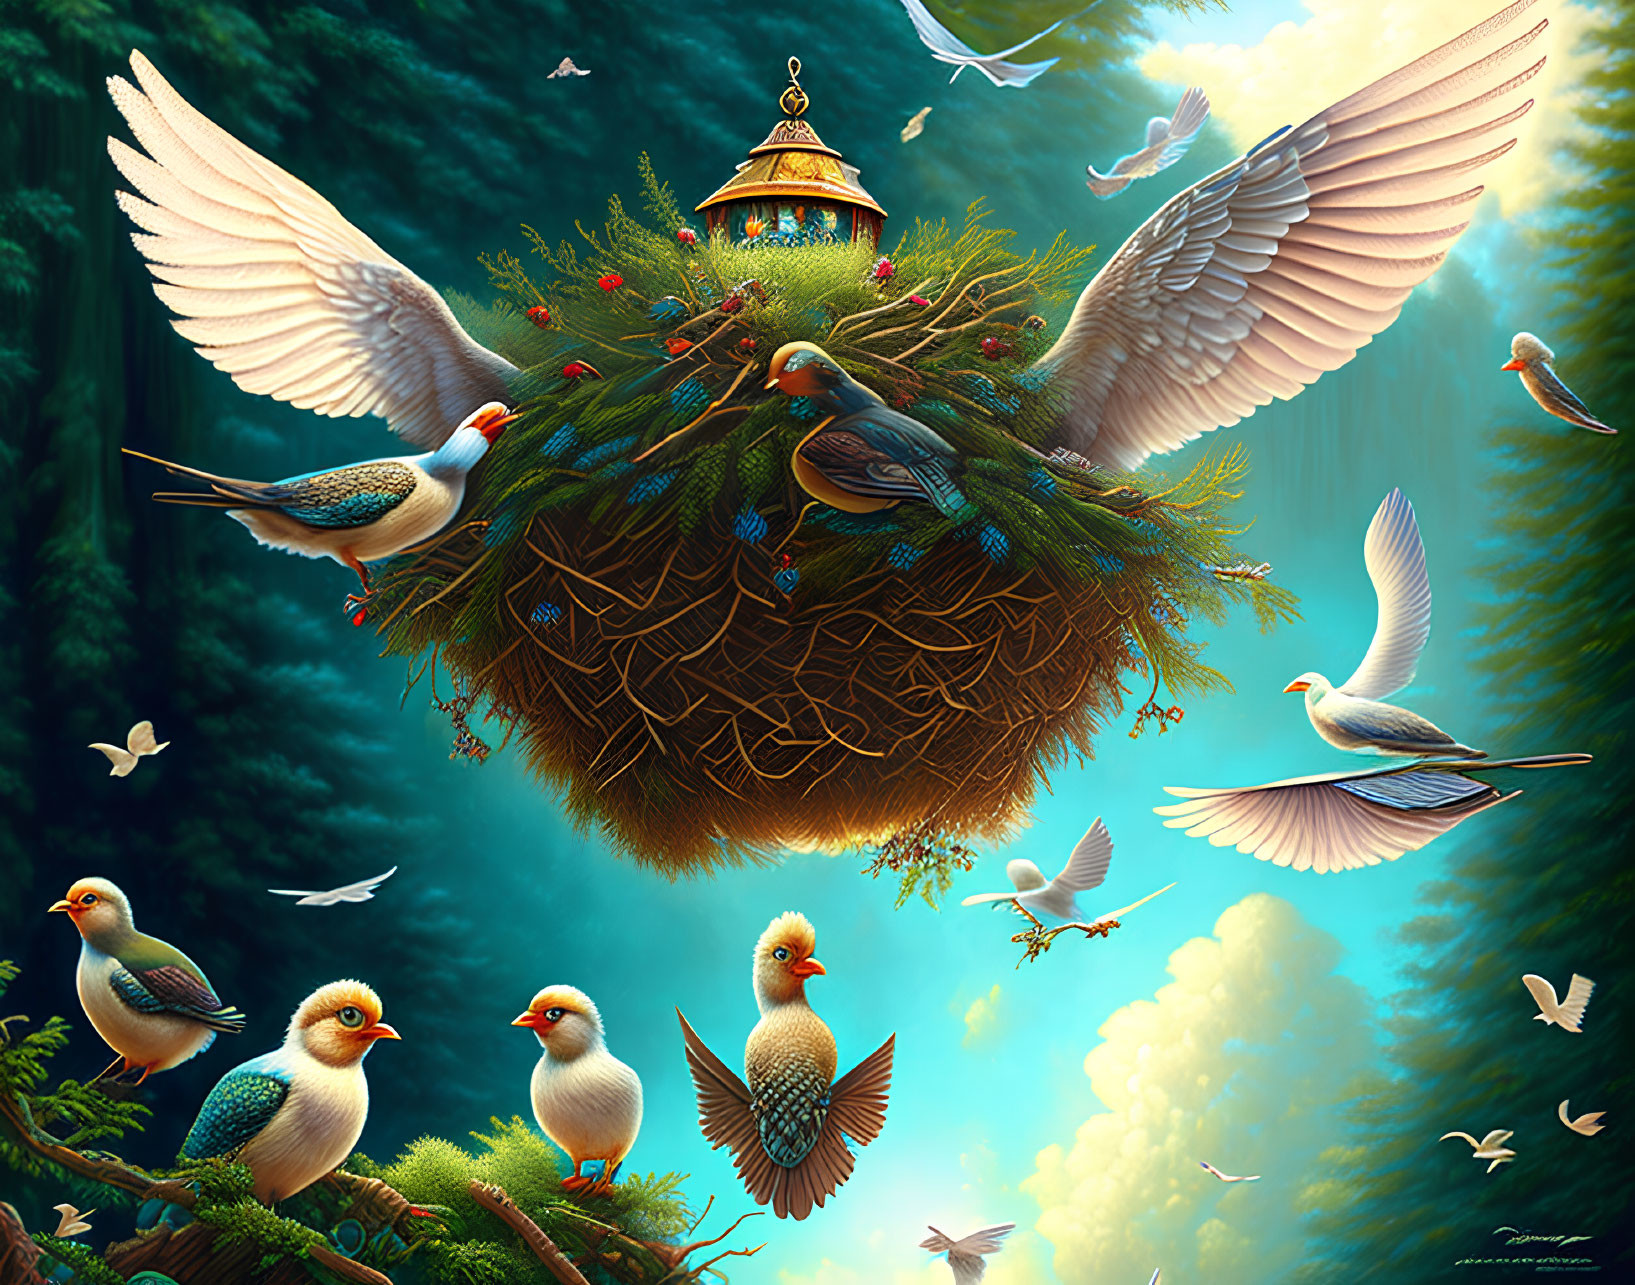 Illustration of floating bird's nest with temple, birds in emerald forest